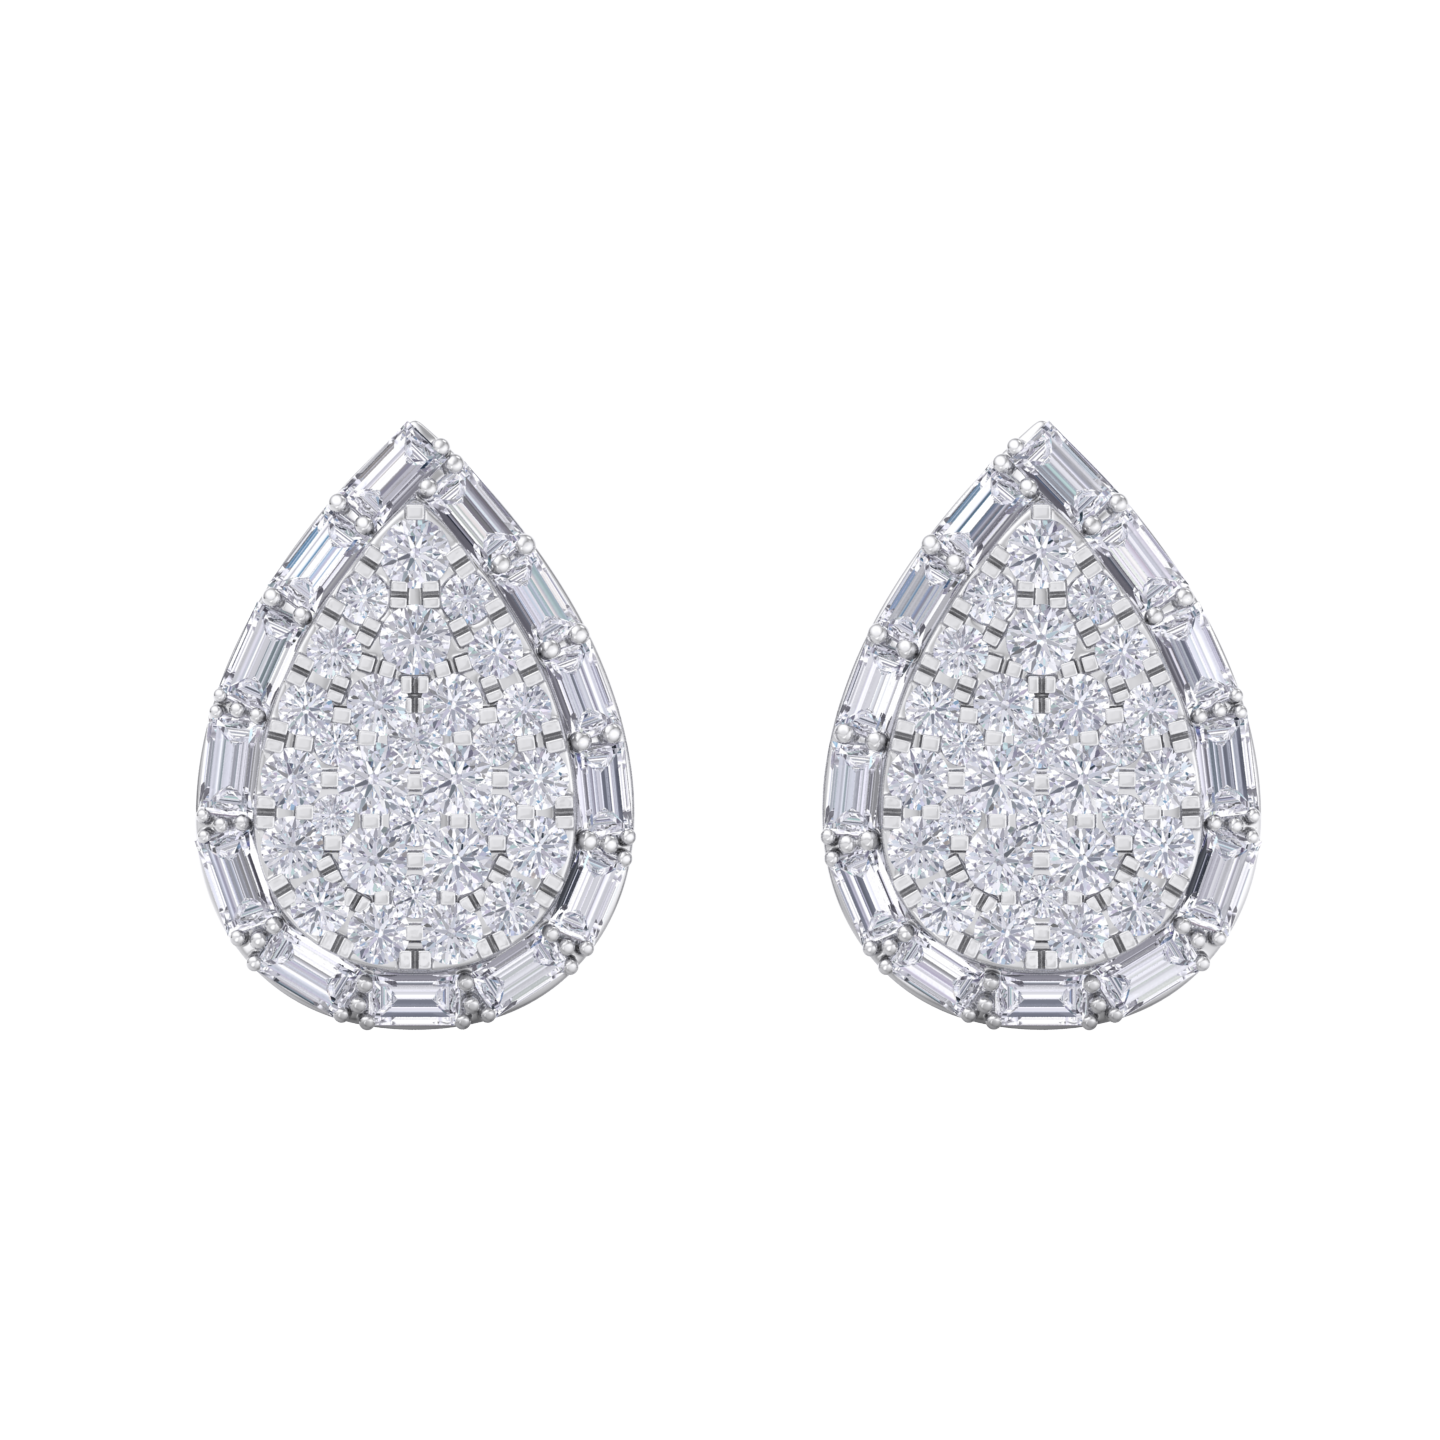 Drop cluster earrings in white gold with white diamonds of 1.55 ct in weight